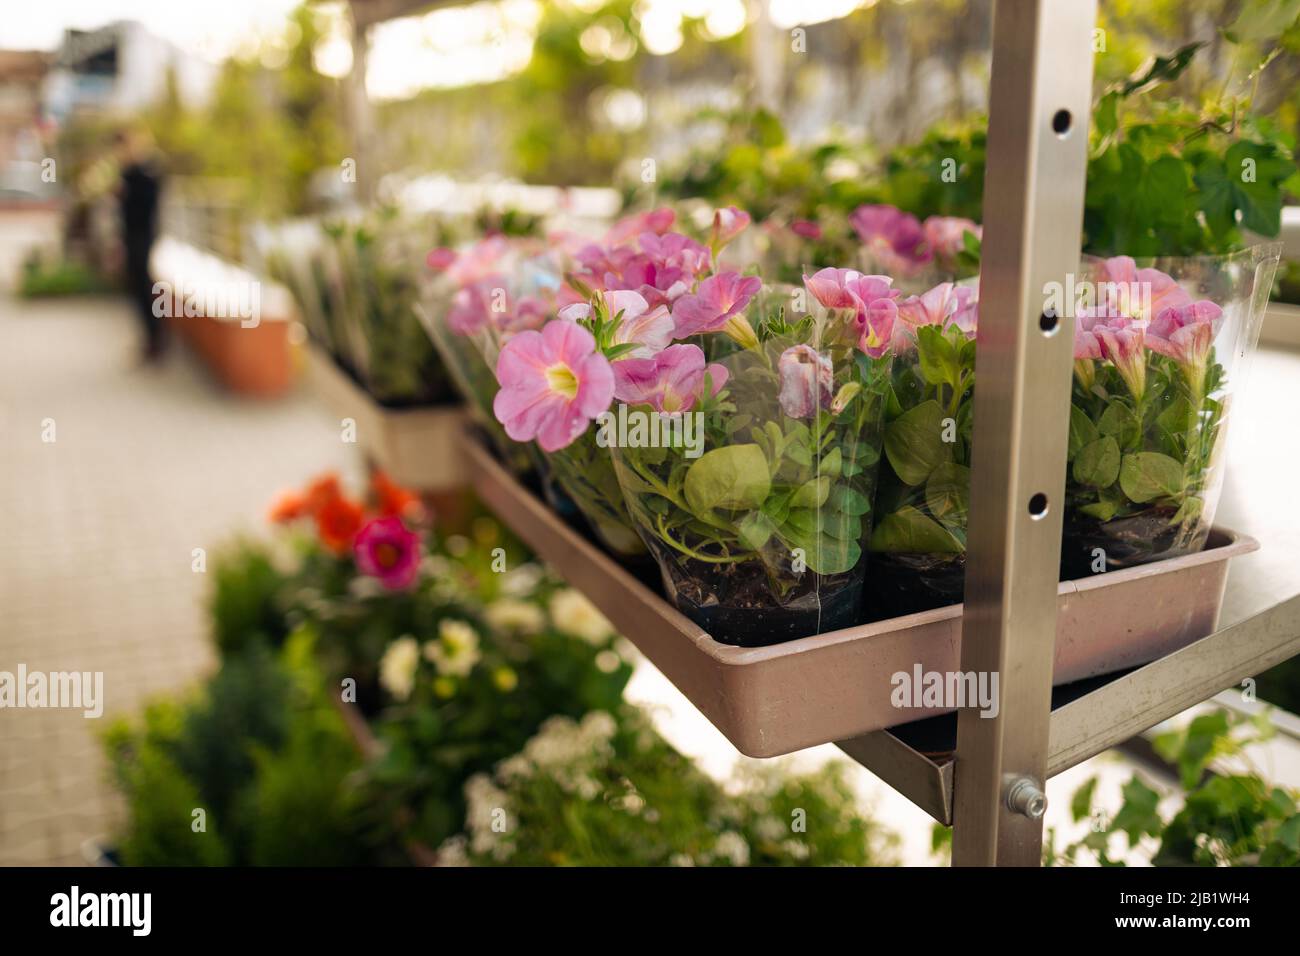 Blossoming outdoor plants stand in racks before market or store in glasshouse Stock Photo